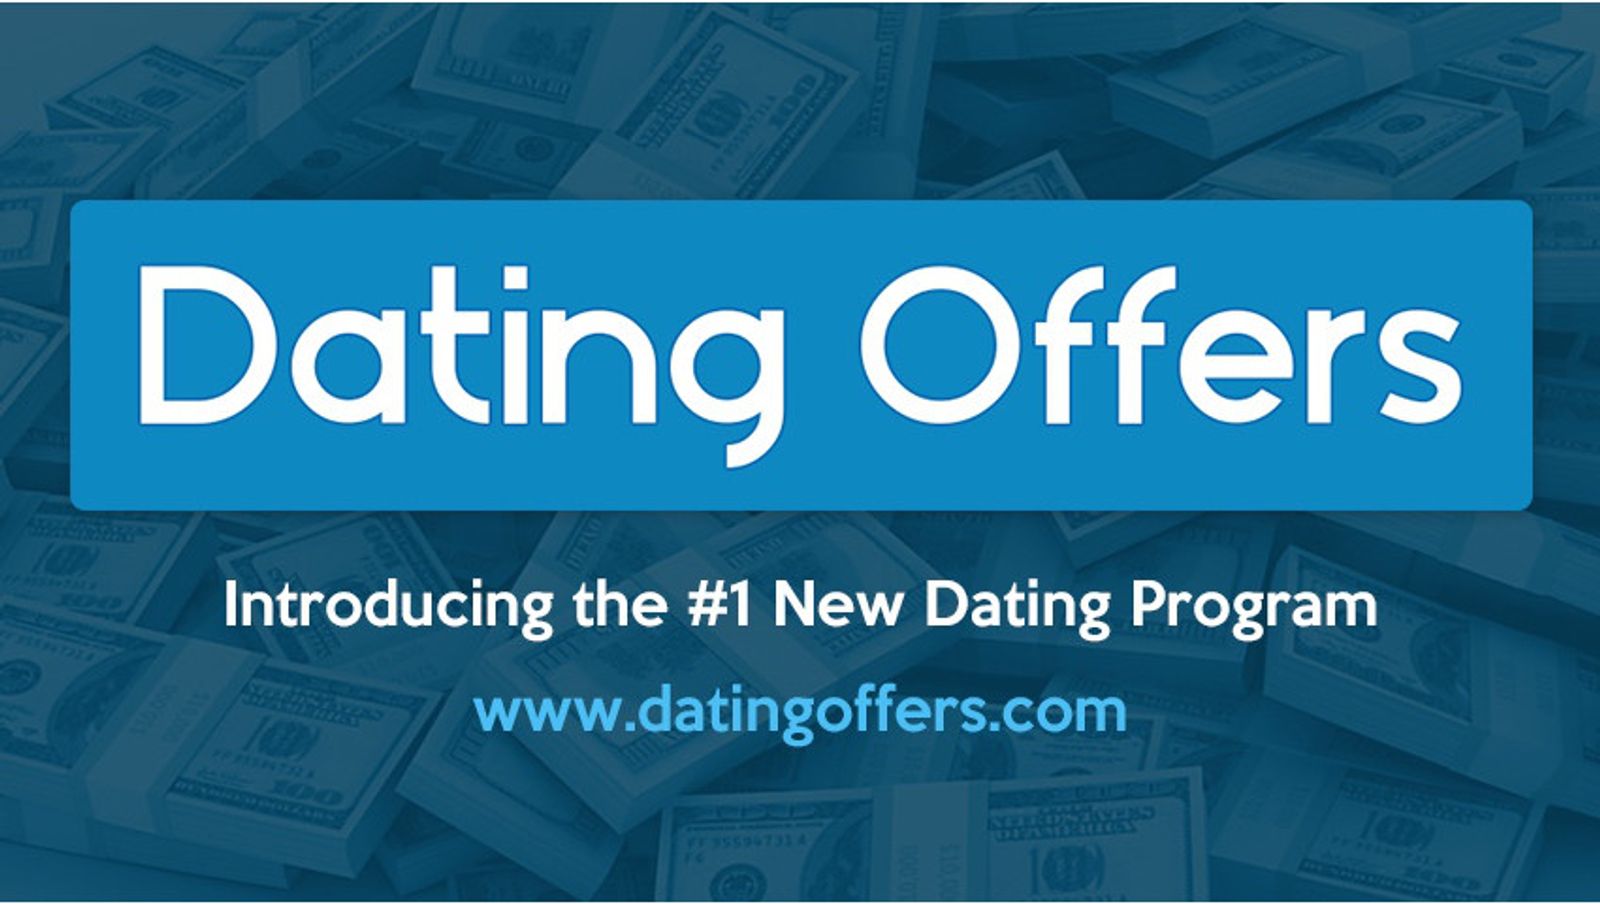 Dating Offers Affiliate Program Launches